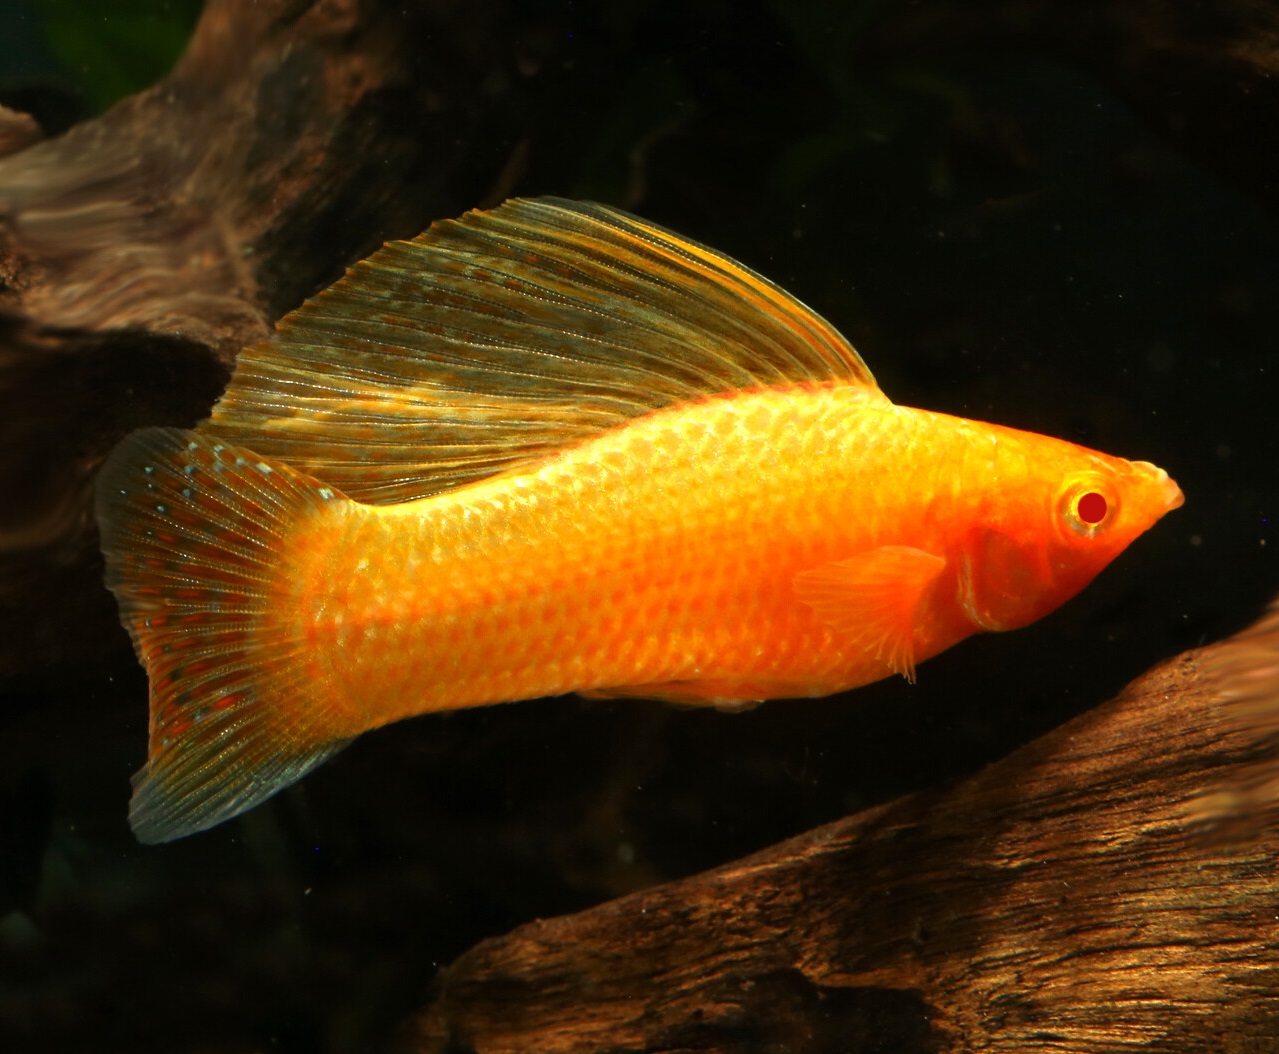 Golden sailfin molly 1 Top 10 Most Beautiful Colorful Fish Types - 33